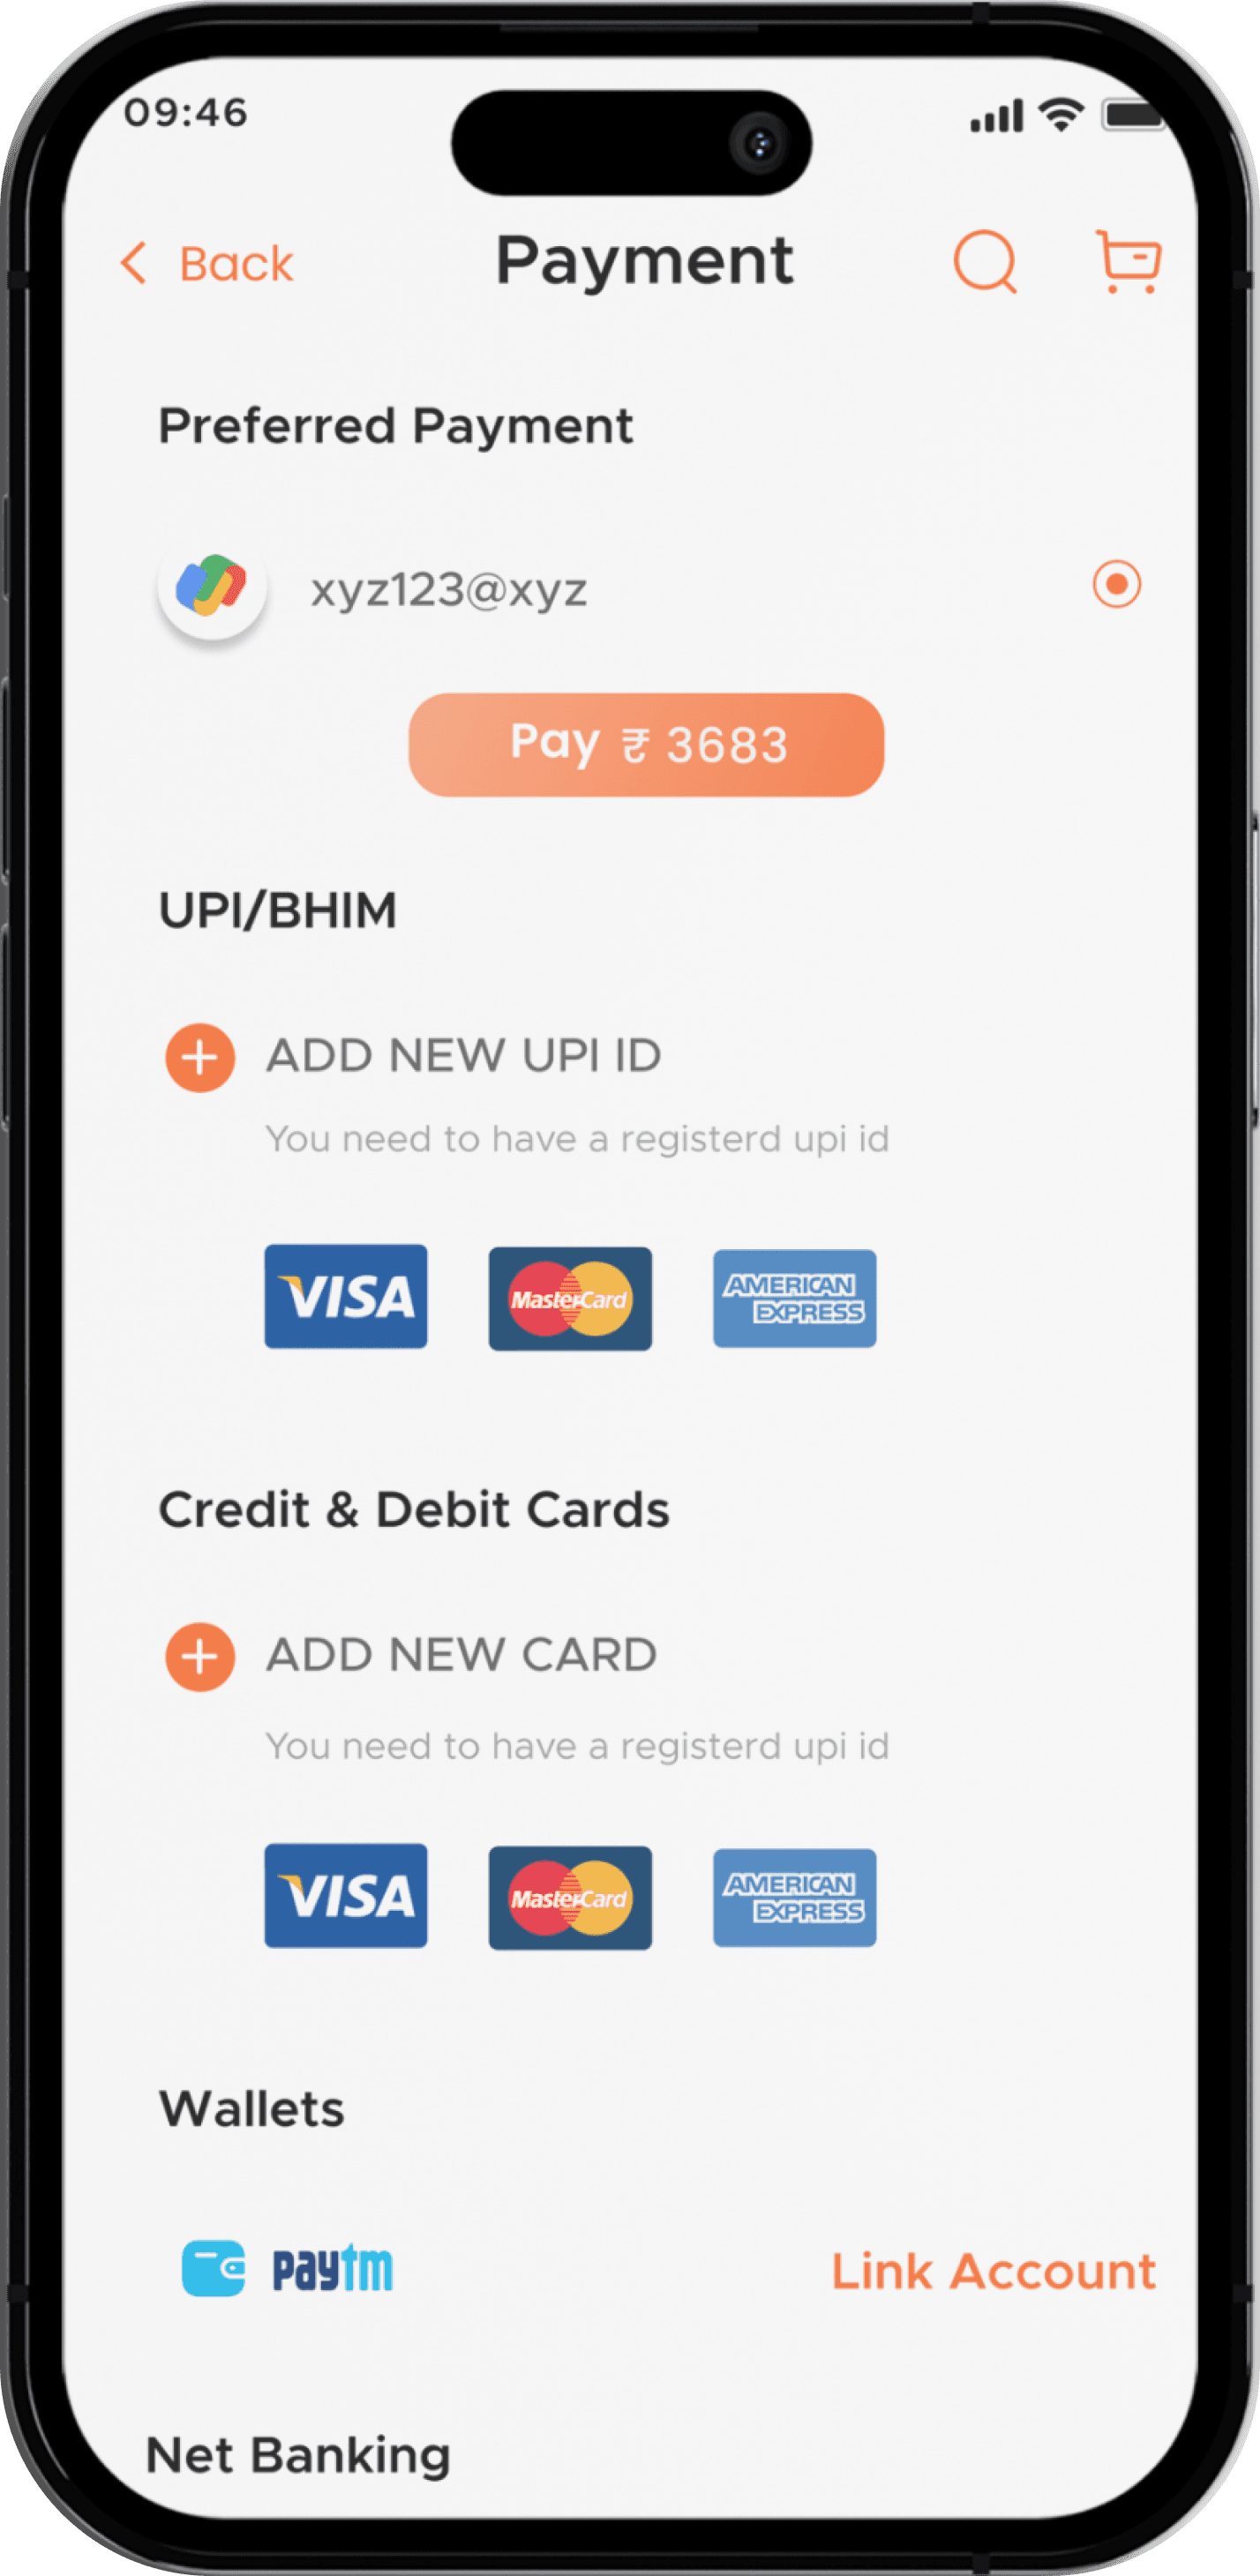 Title - Payment Screen